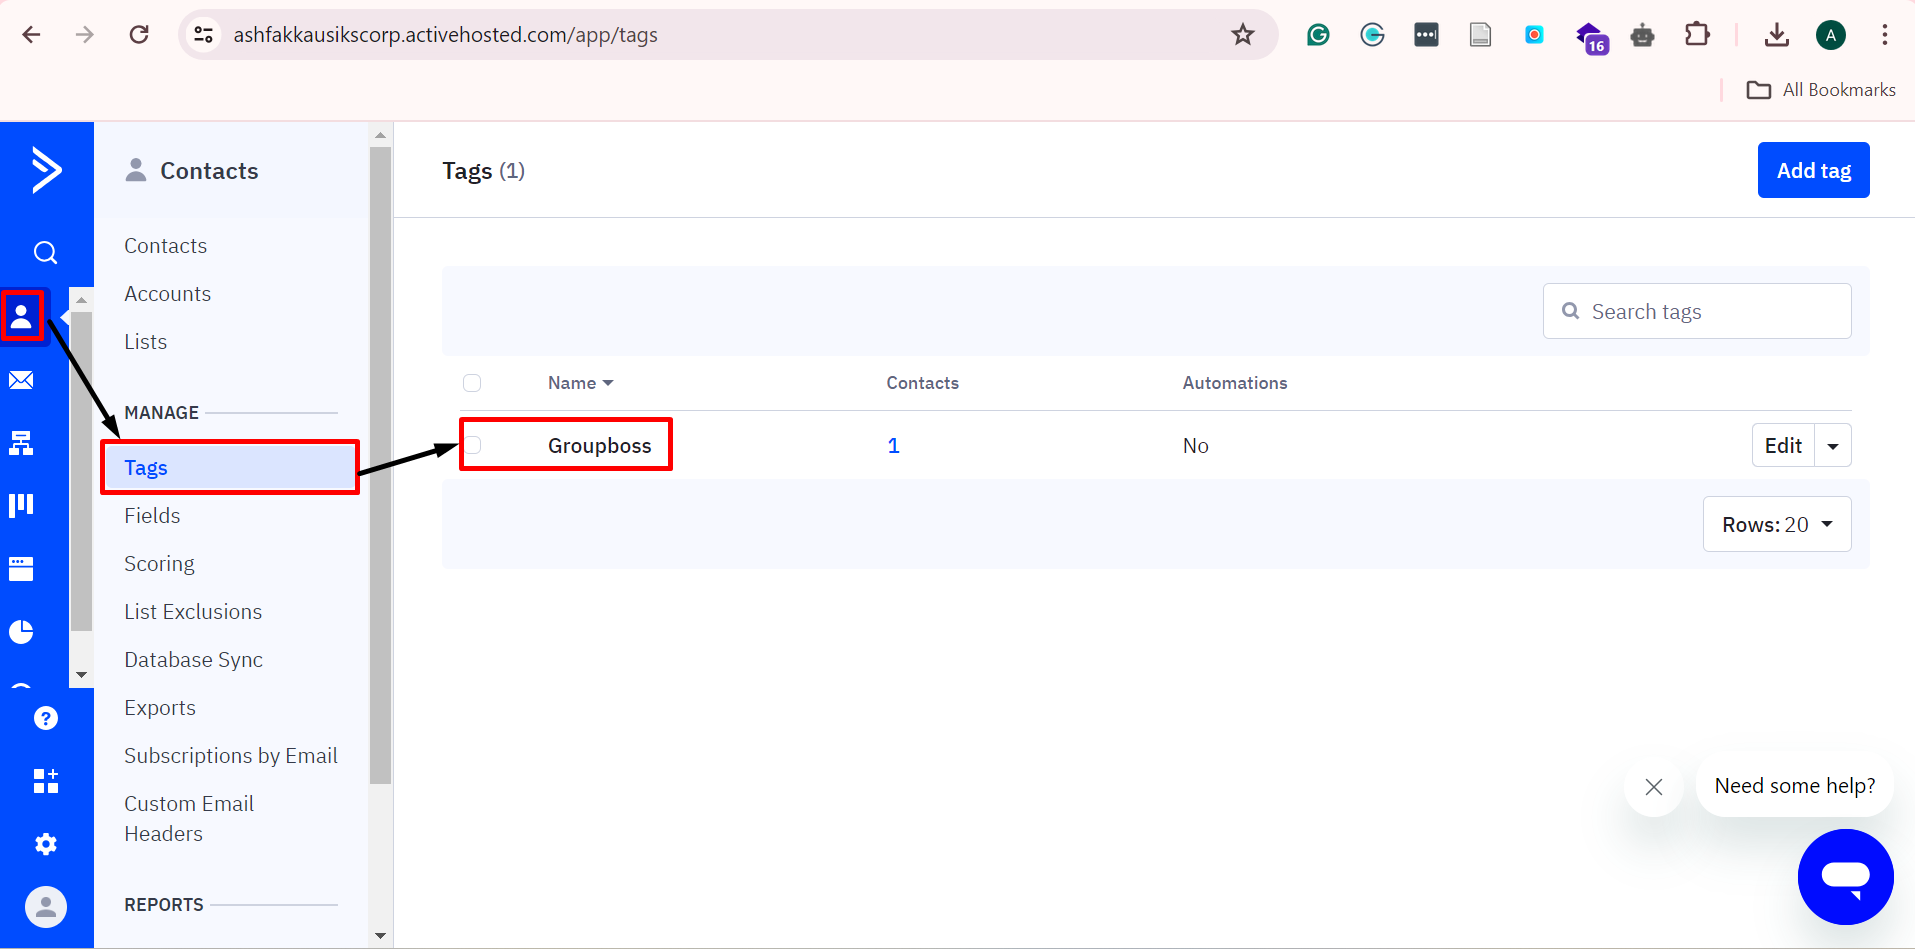 Get Tag name to finalize the ActiveCampaign integration with Groupboss.